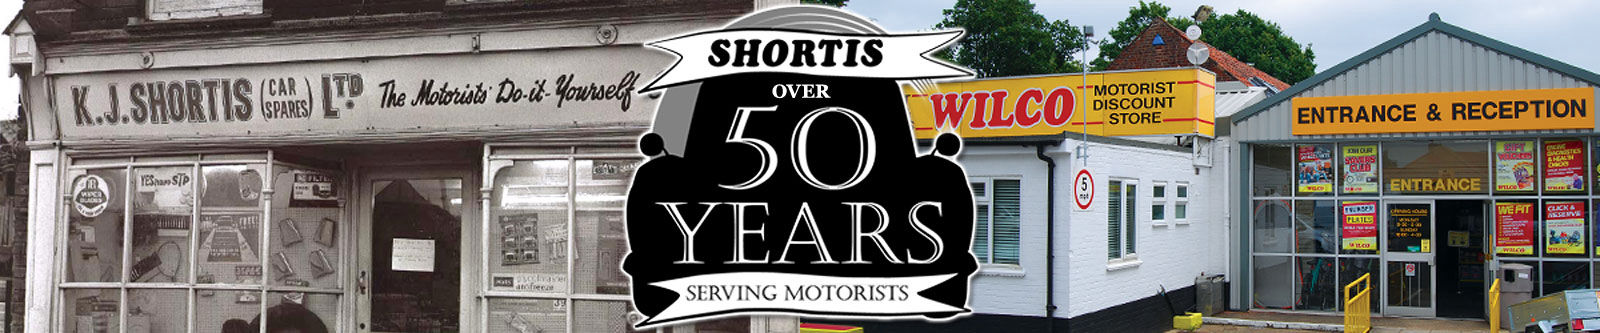 Shortis Group - Over 50 Years Serving Motorists